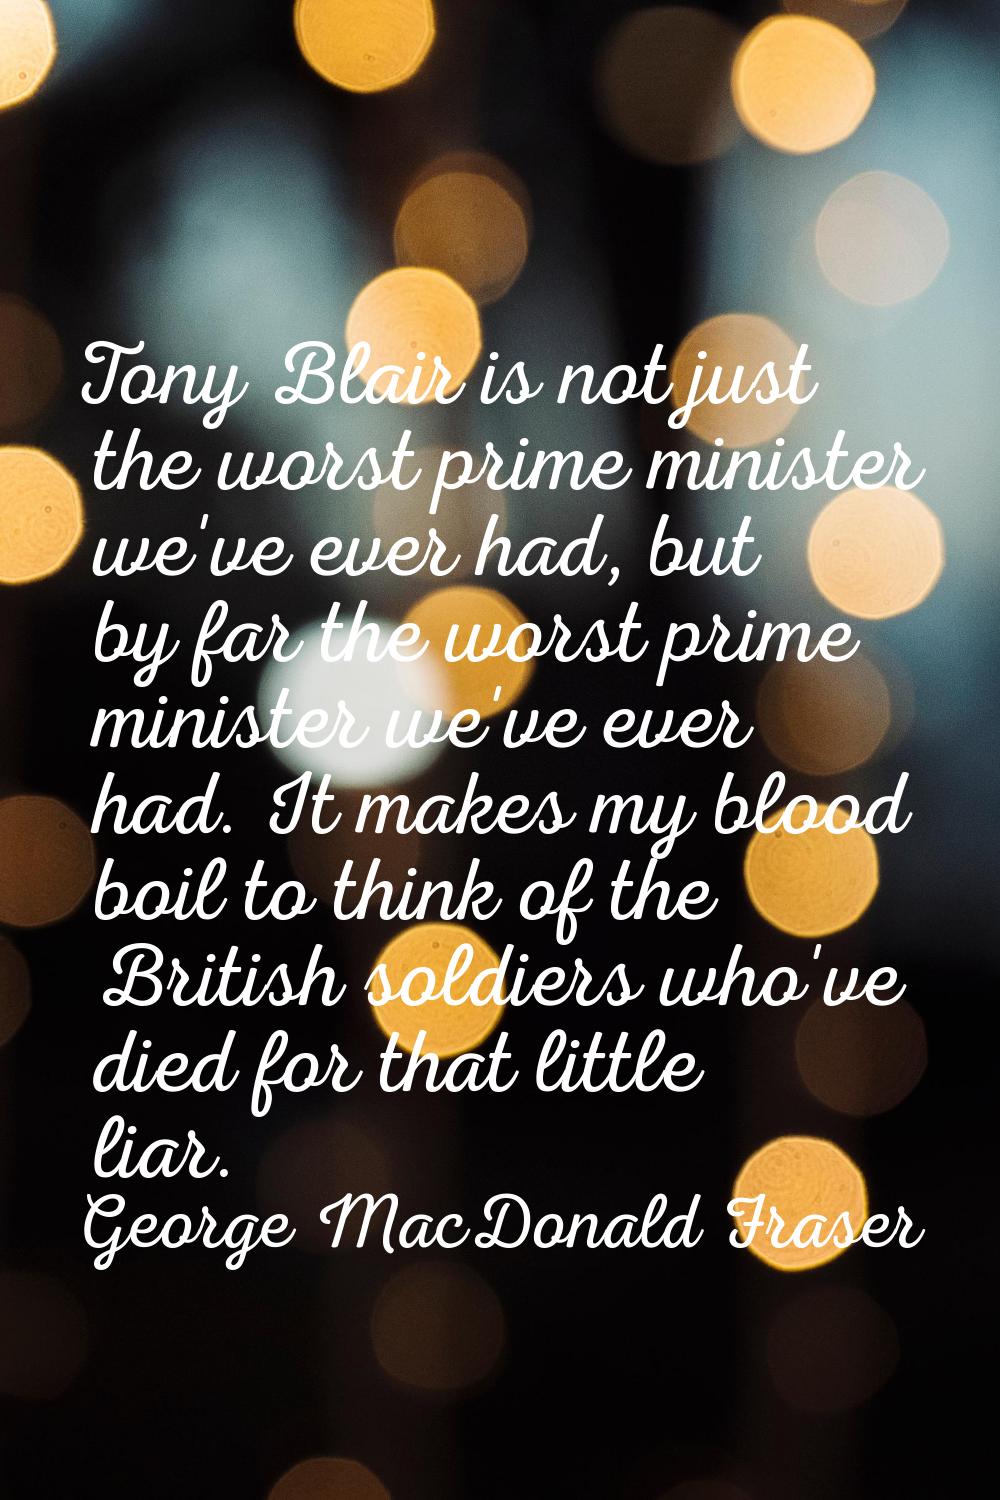 Tony Blair is not just the worst prime minister we've ever had, but by far the worst prime minister